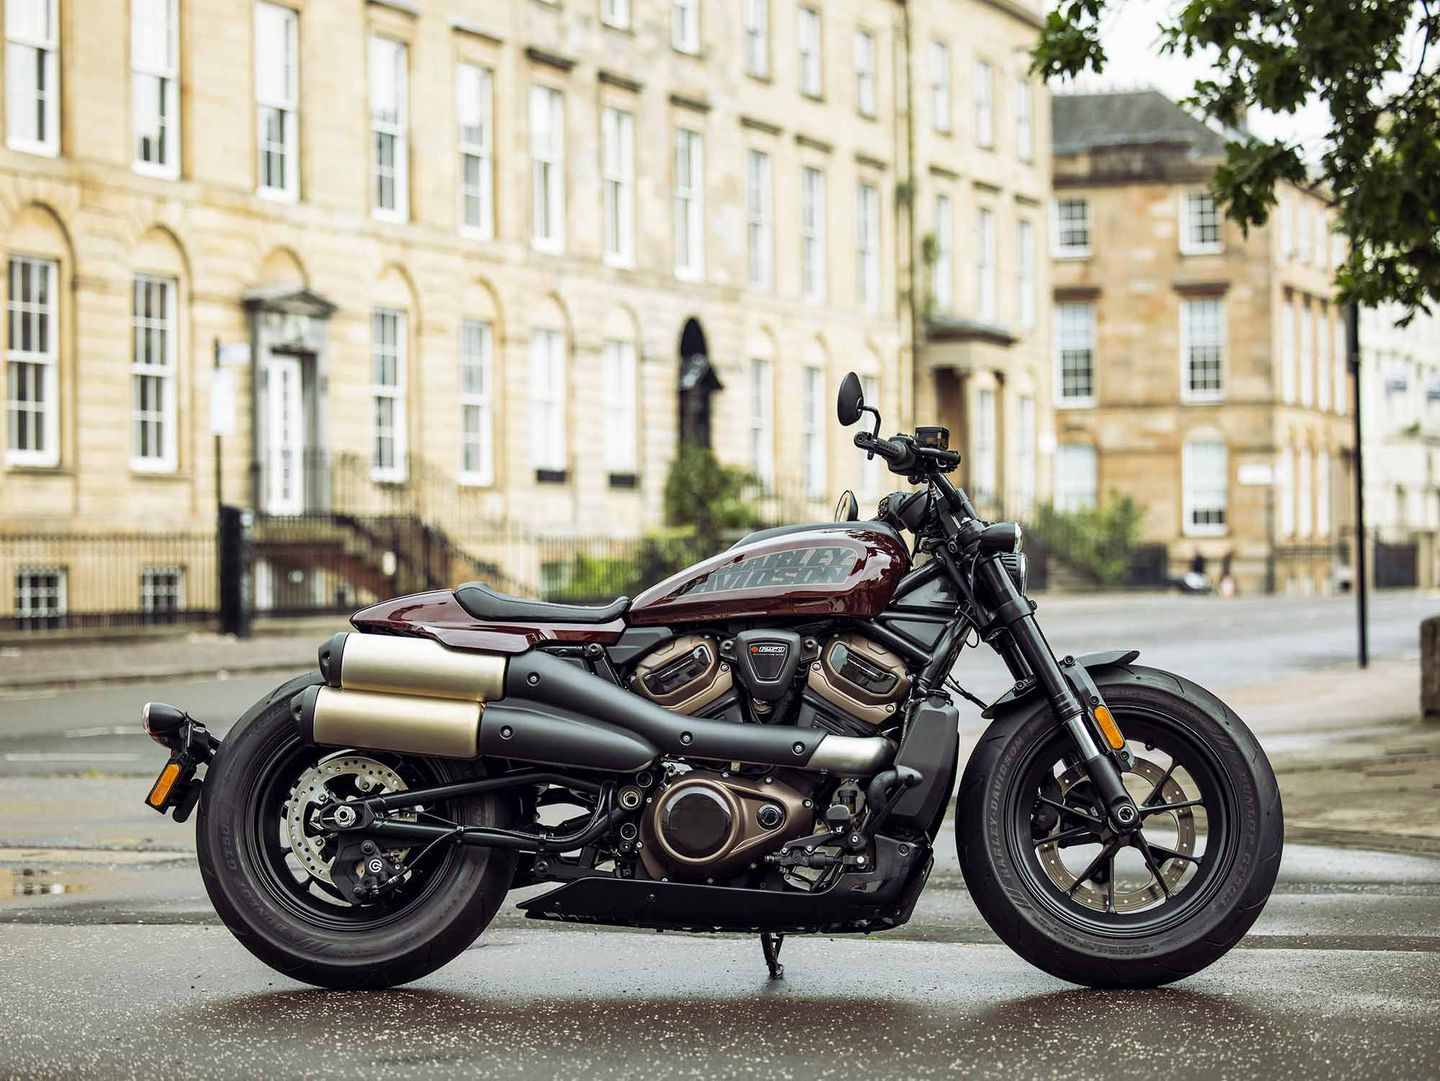 2021 Harley-Davidson Sportster S Preview | Motorcyclist